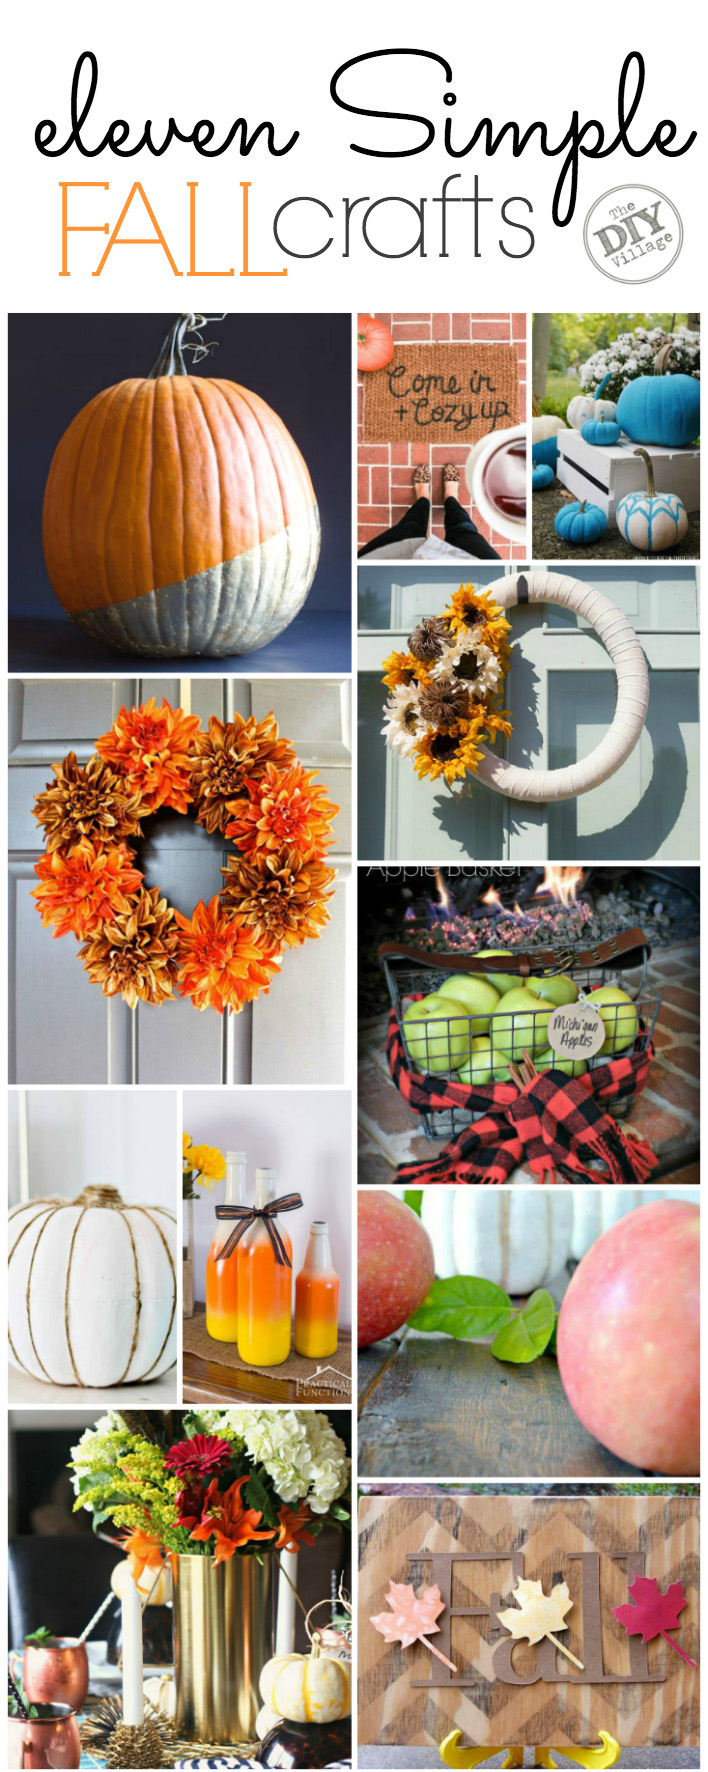 Eleven Simple Fall Crafts - The DIY Village